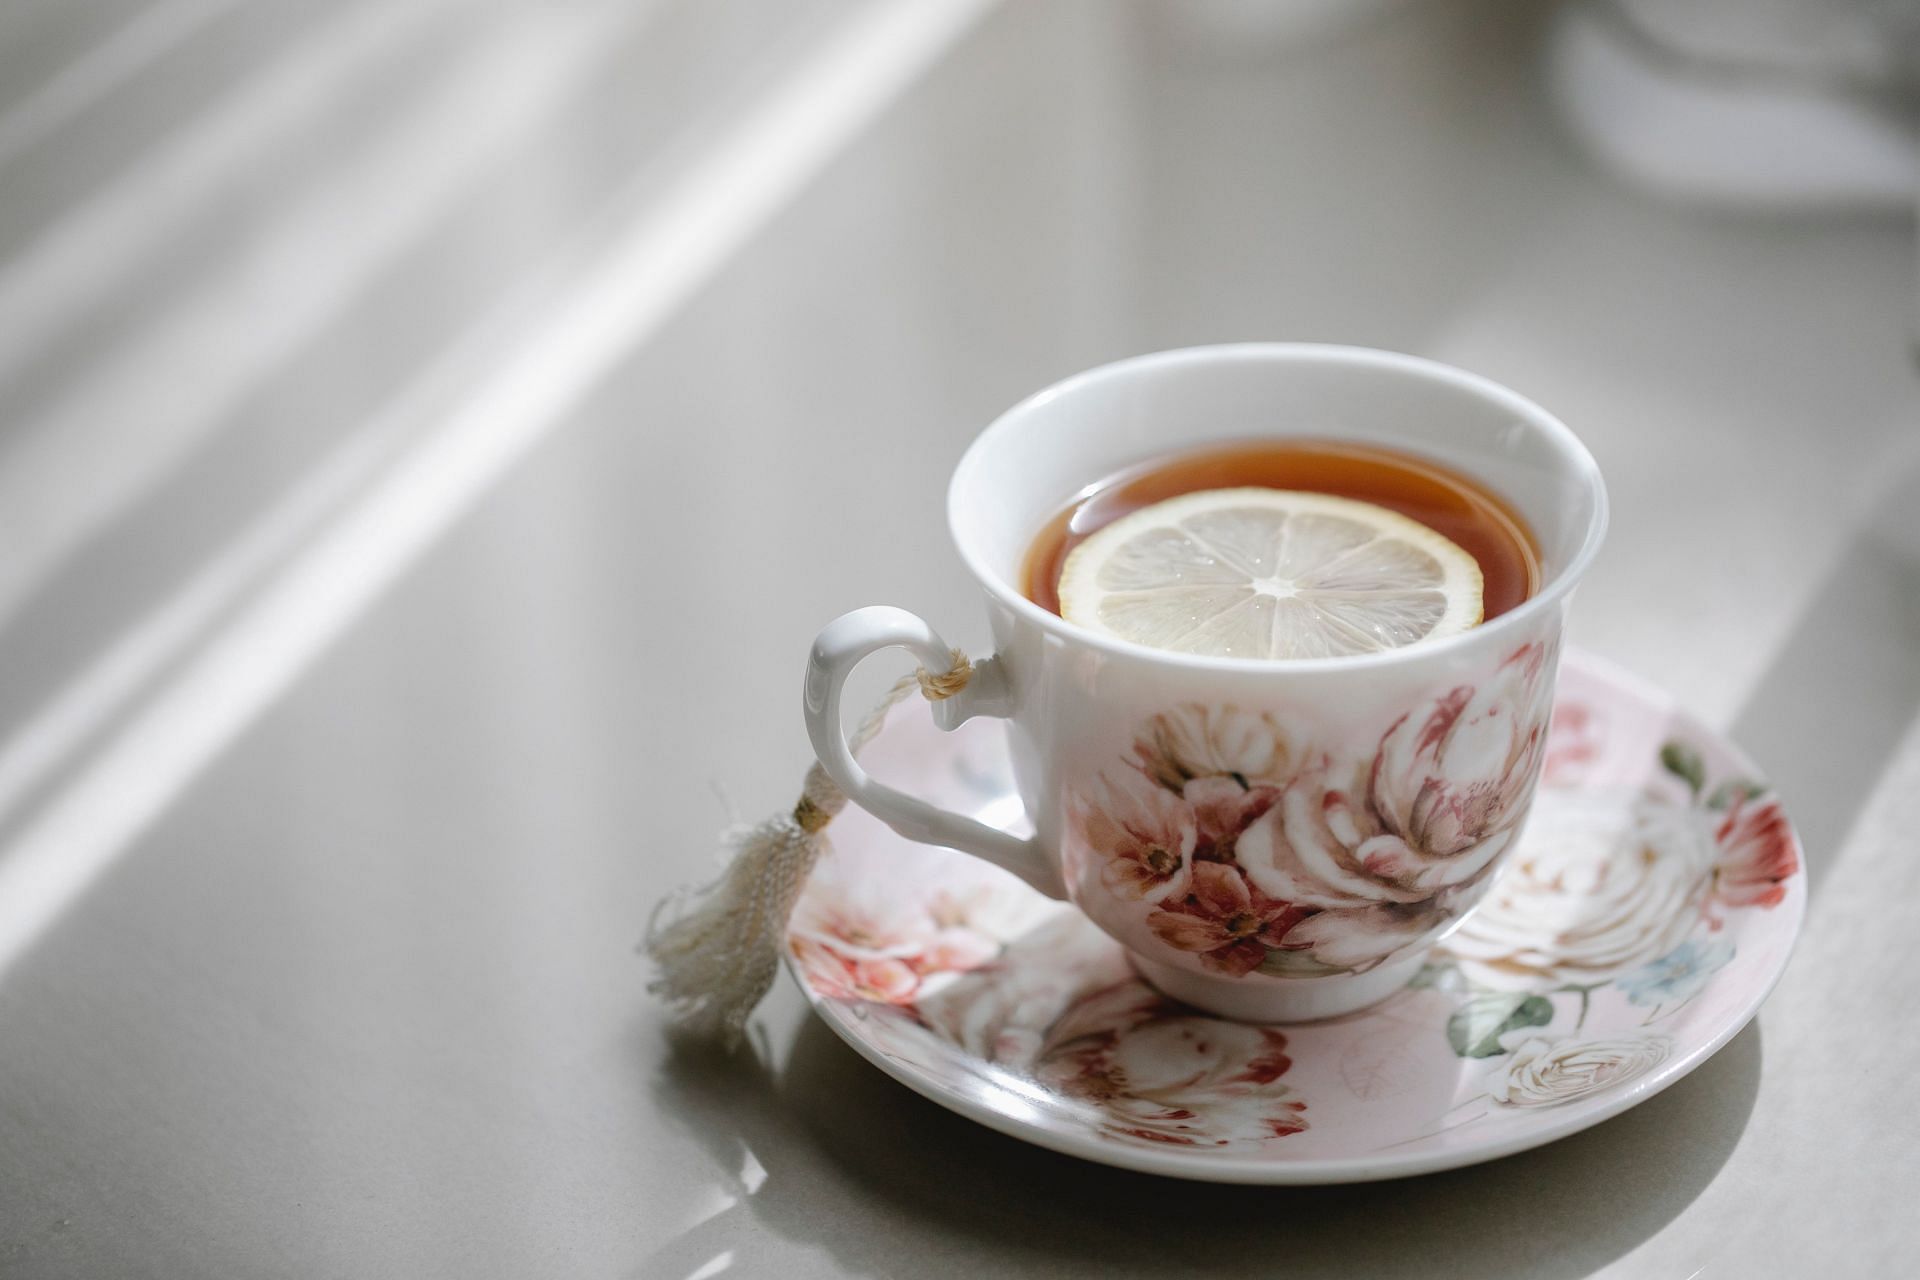 Drinking warm liquids or ginger tea can help alleviate the symptoms of gas in some people. (Image via Pexels/Charlotte May)